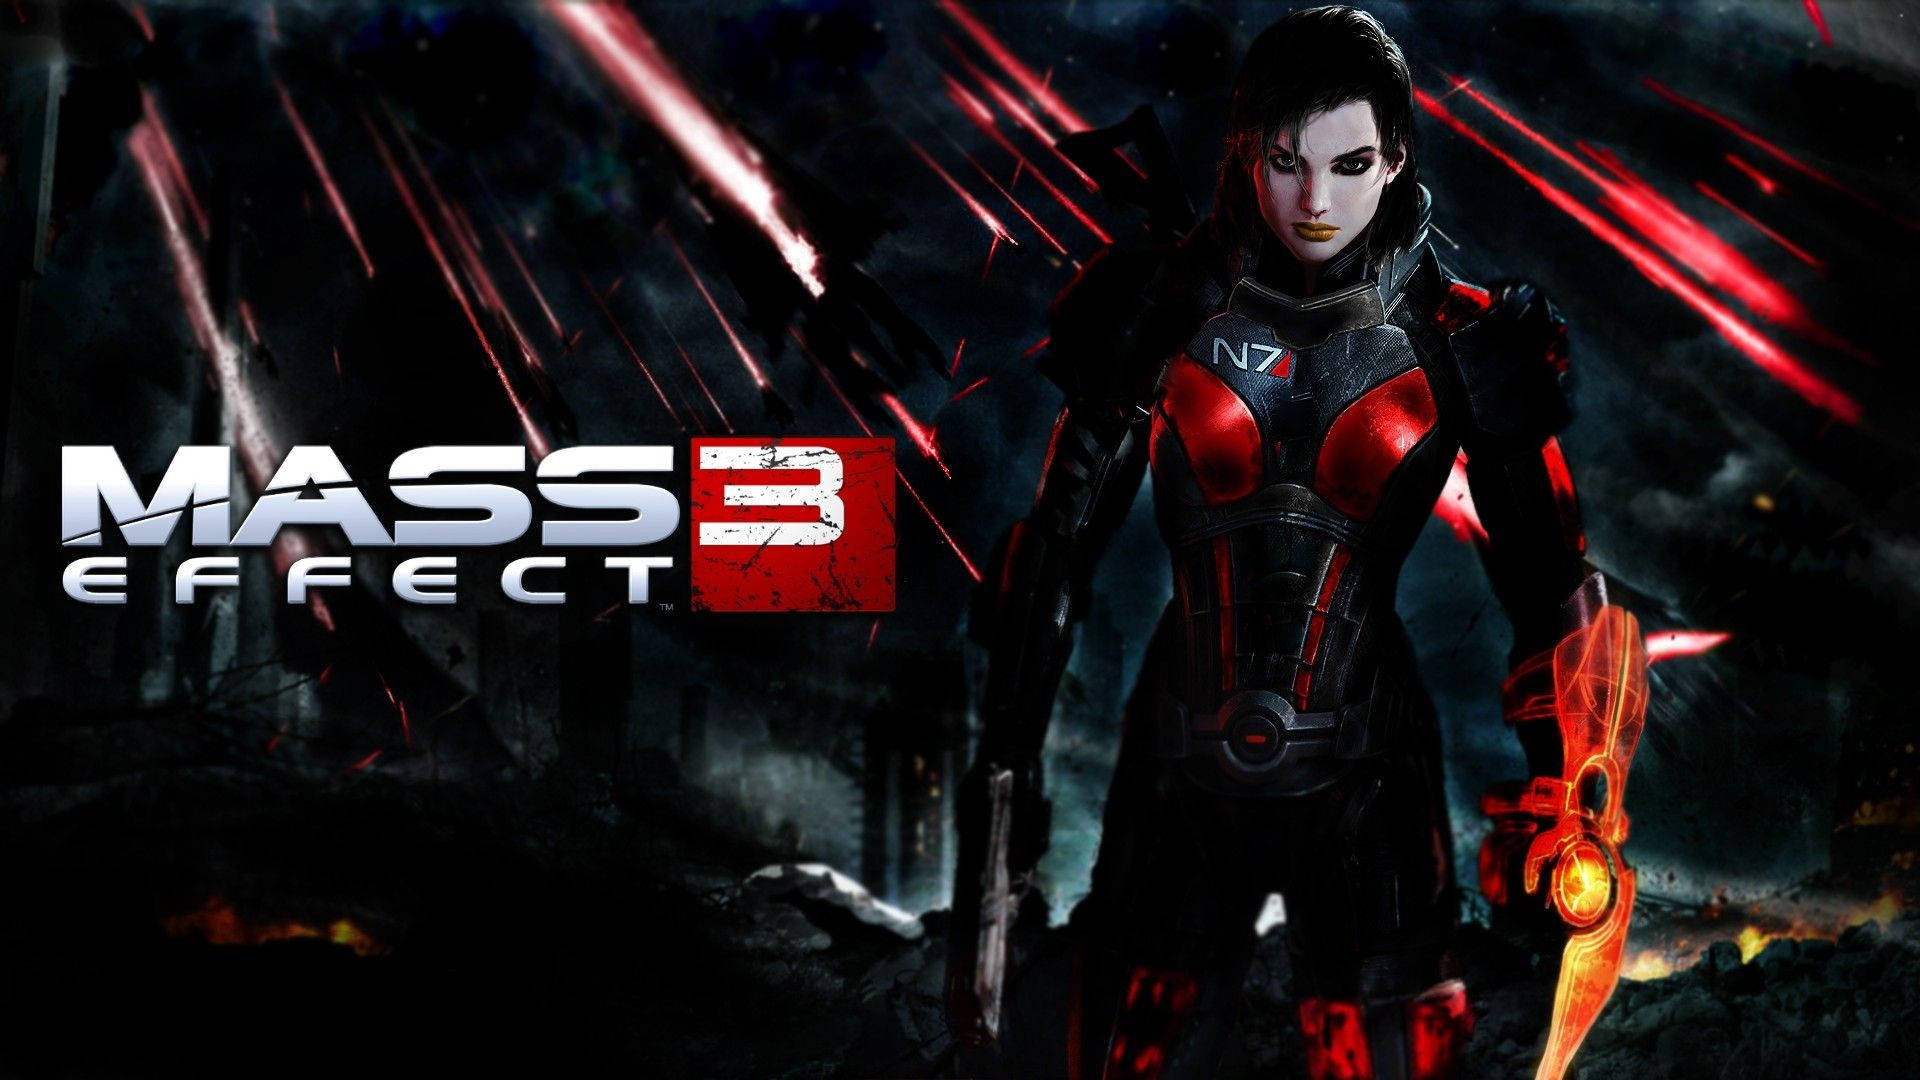 Mass Effect 3 Femshep In Red And Black Armor Background